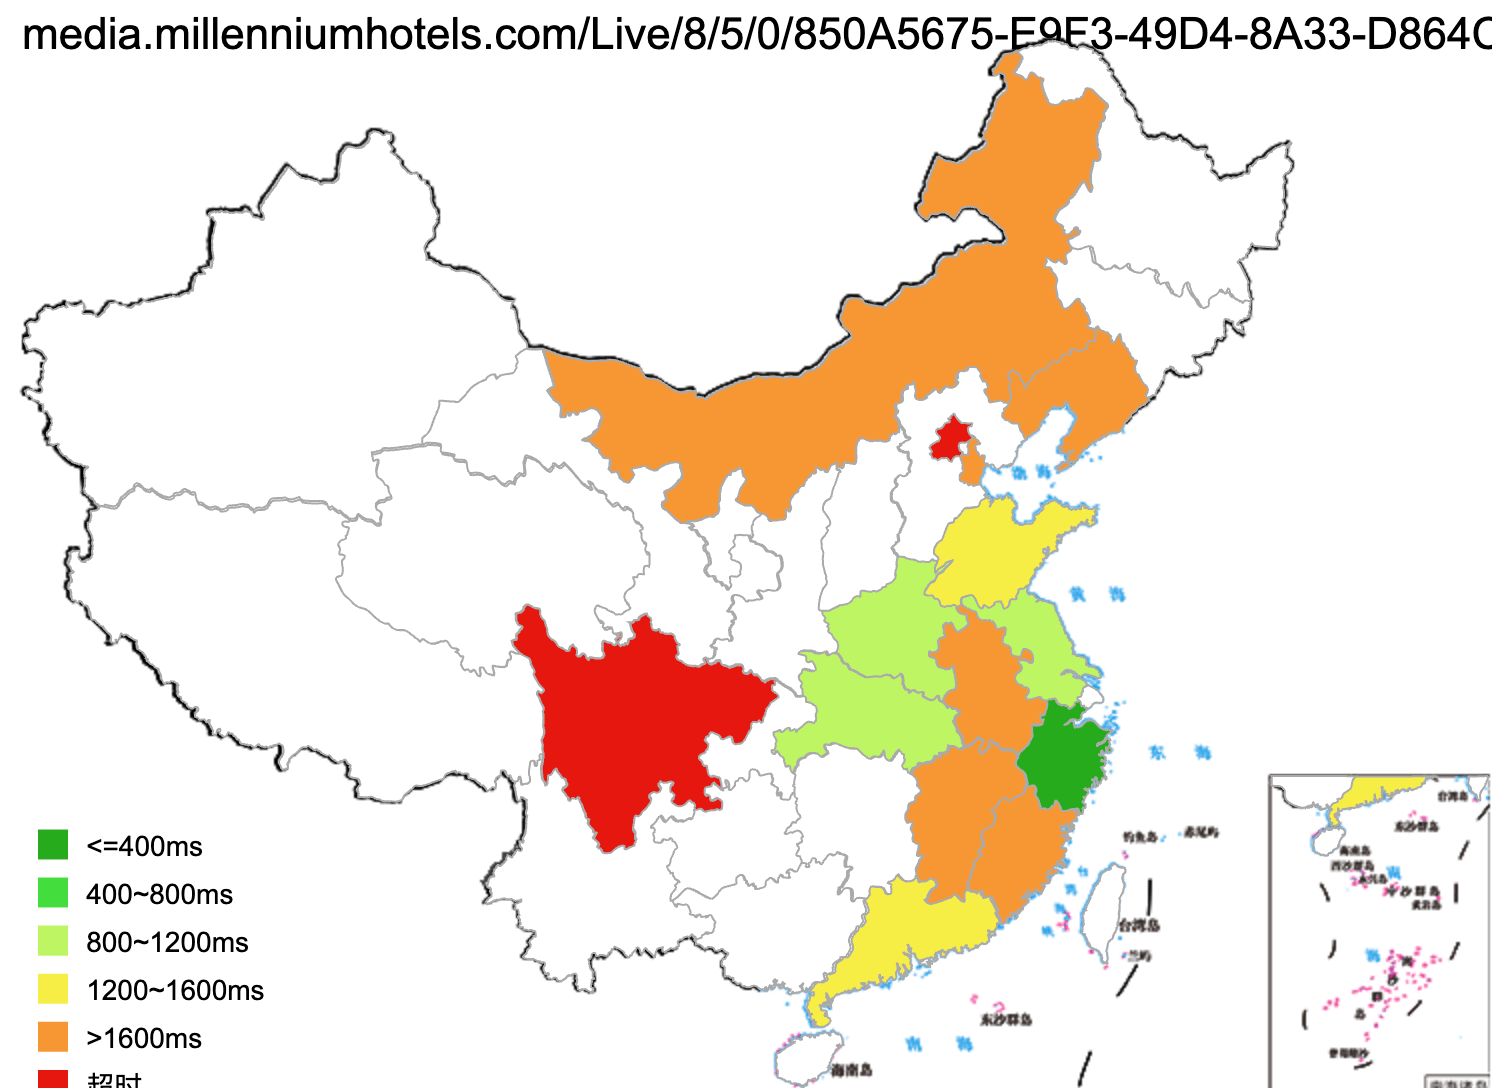 Images on Millennium Hotels and Resorts website are not accessible in China